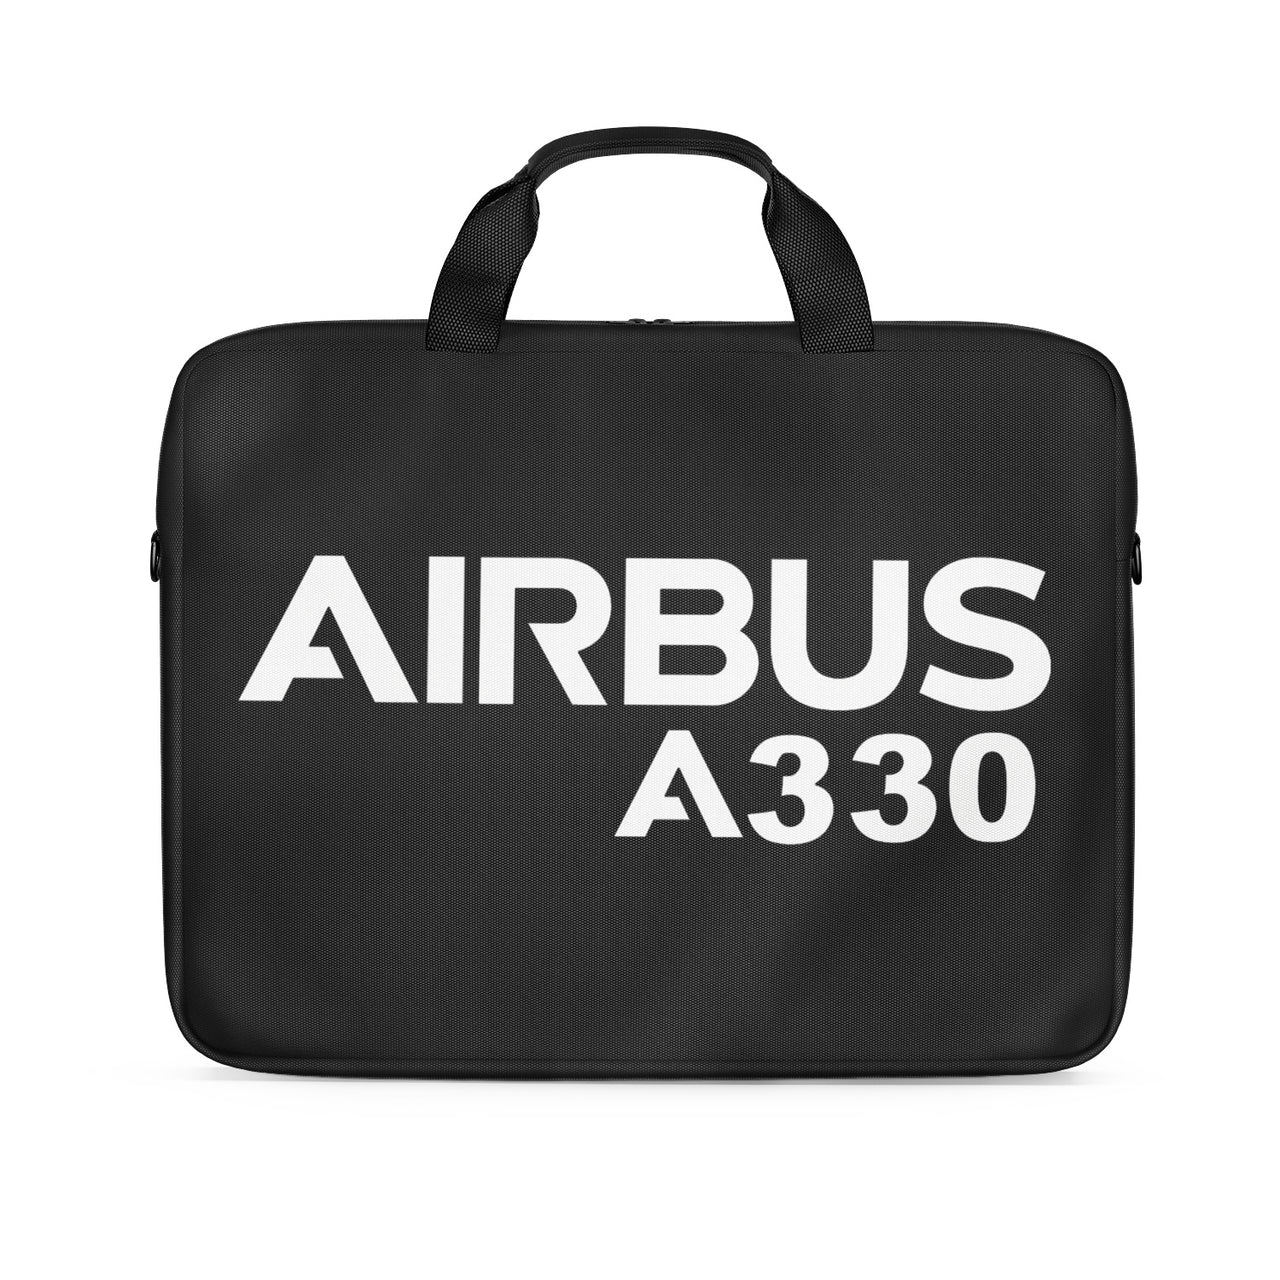 Airbus A330 & Text Designed Laptop & Tablet Bags